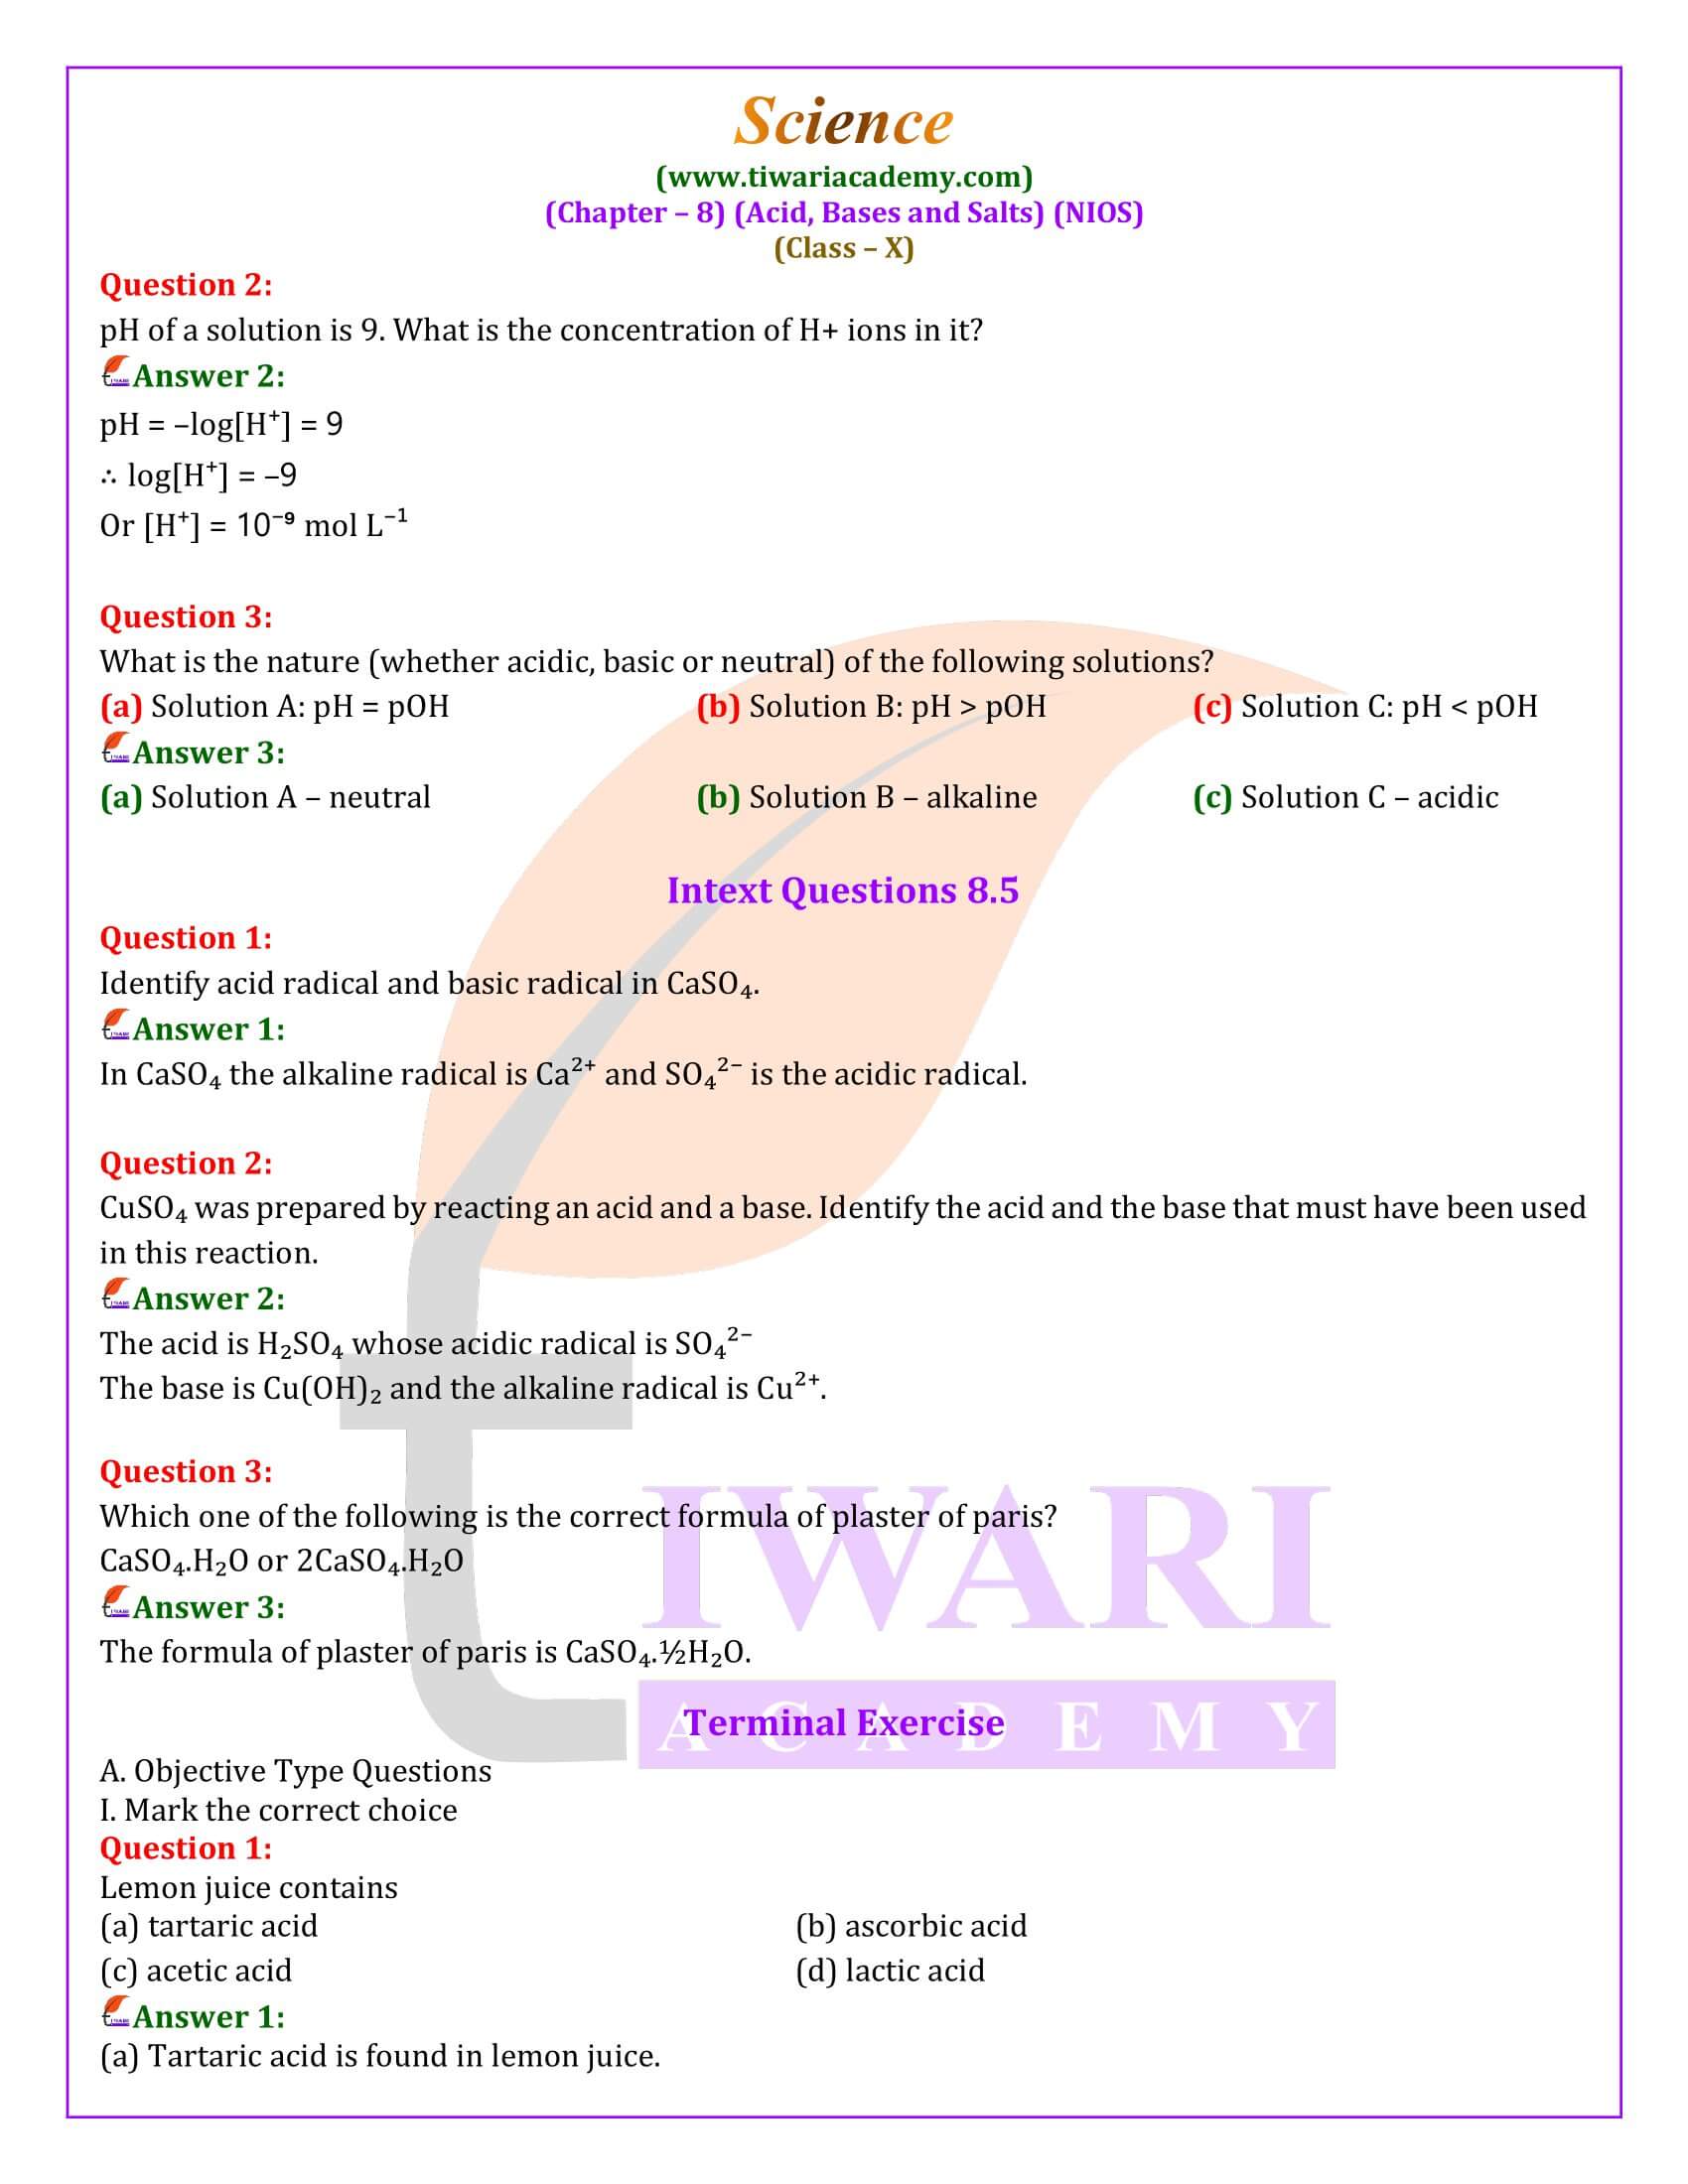 NIOS Class 10 Science Chapter 8 Acids, Bases and Salts Solutions